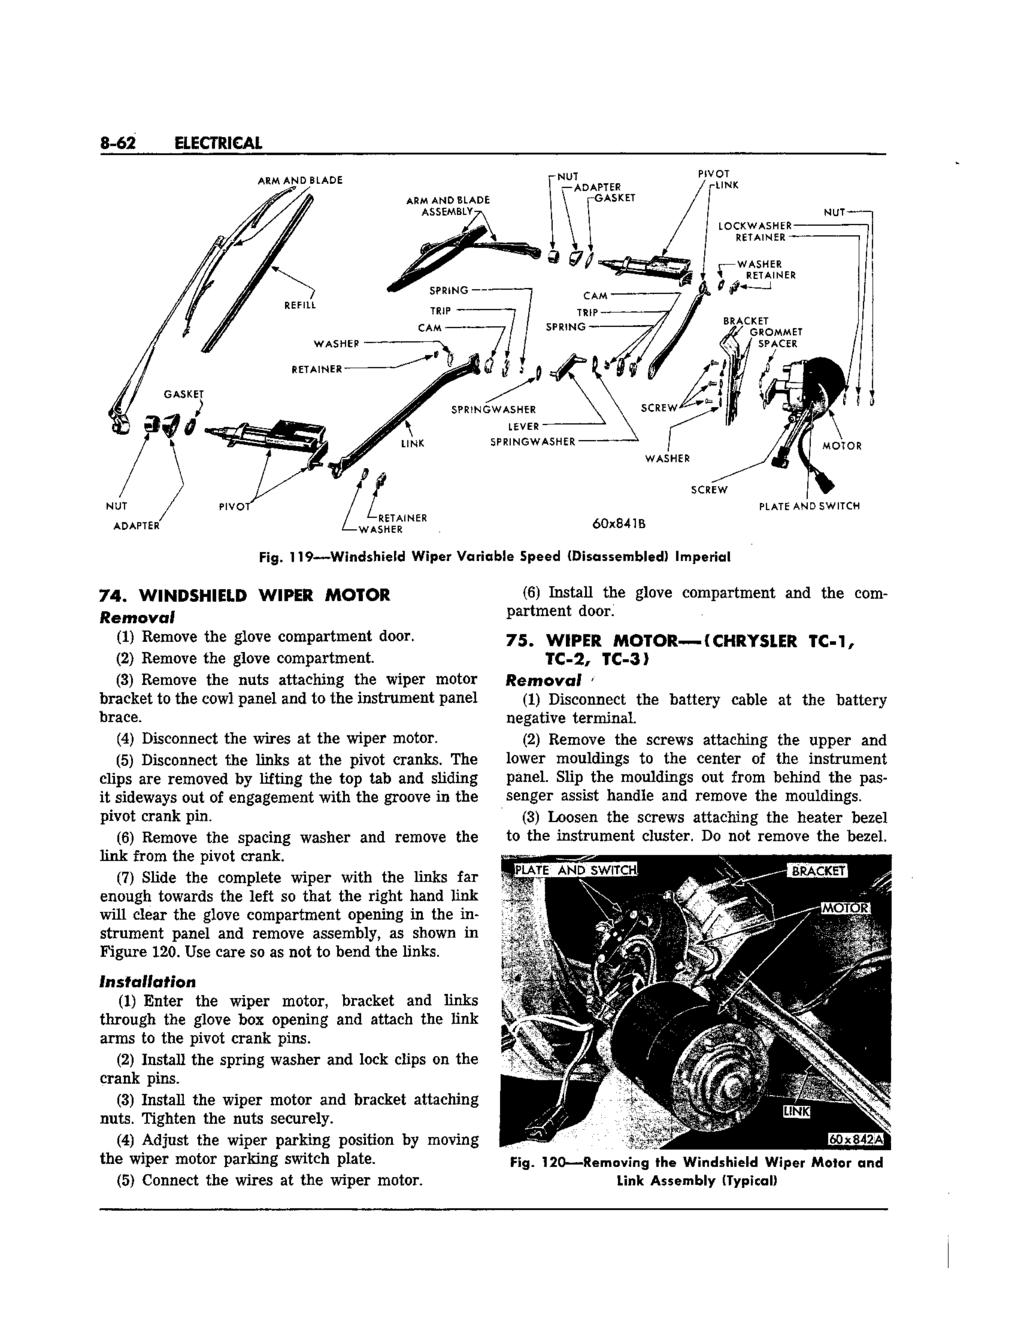 8-62 ELECTRICAL 74. WINDSHIELD WIPER MOTOR Fig. 119 Windshield Wiper Variable Speed (Disassembled) Imperial Removal (1) Remove the glove compartment door. (2) Remove the glove compartment.